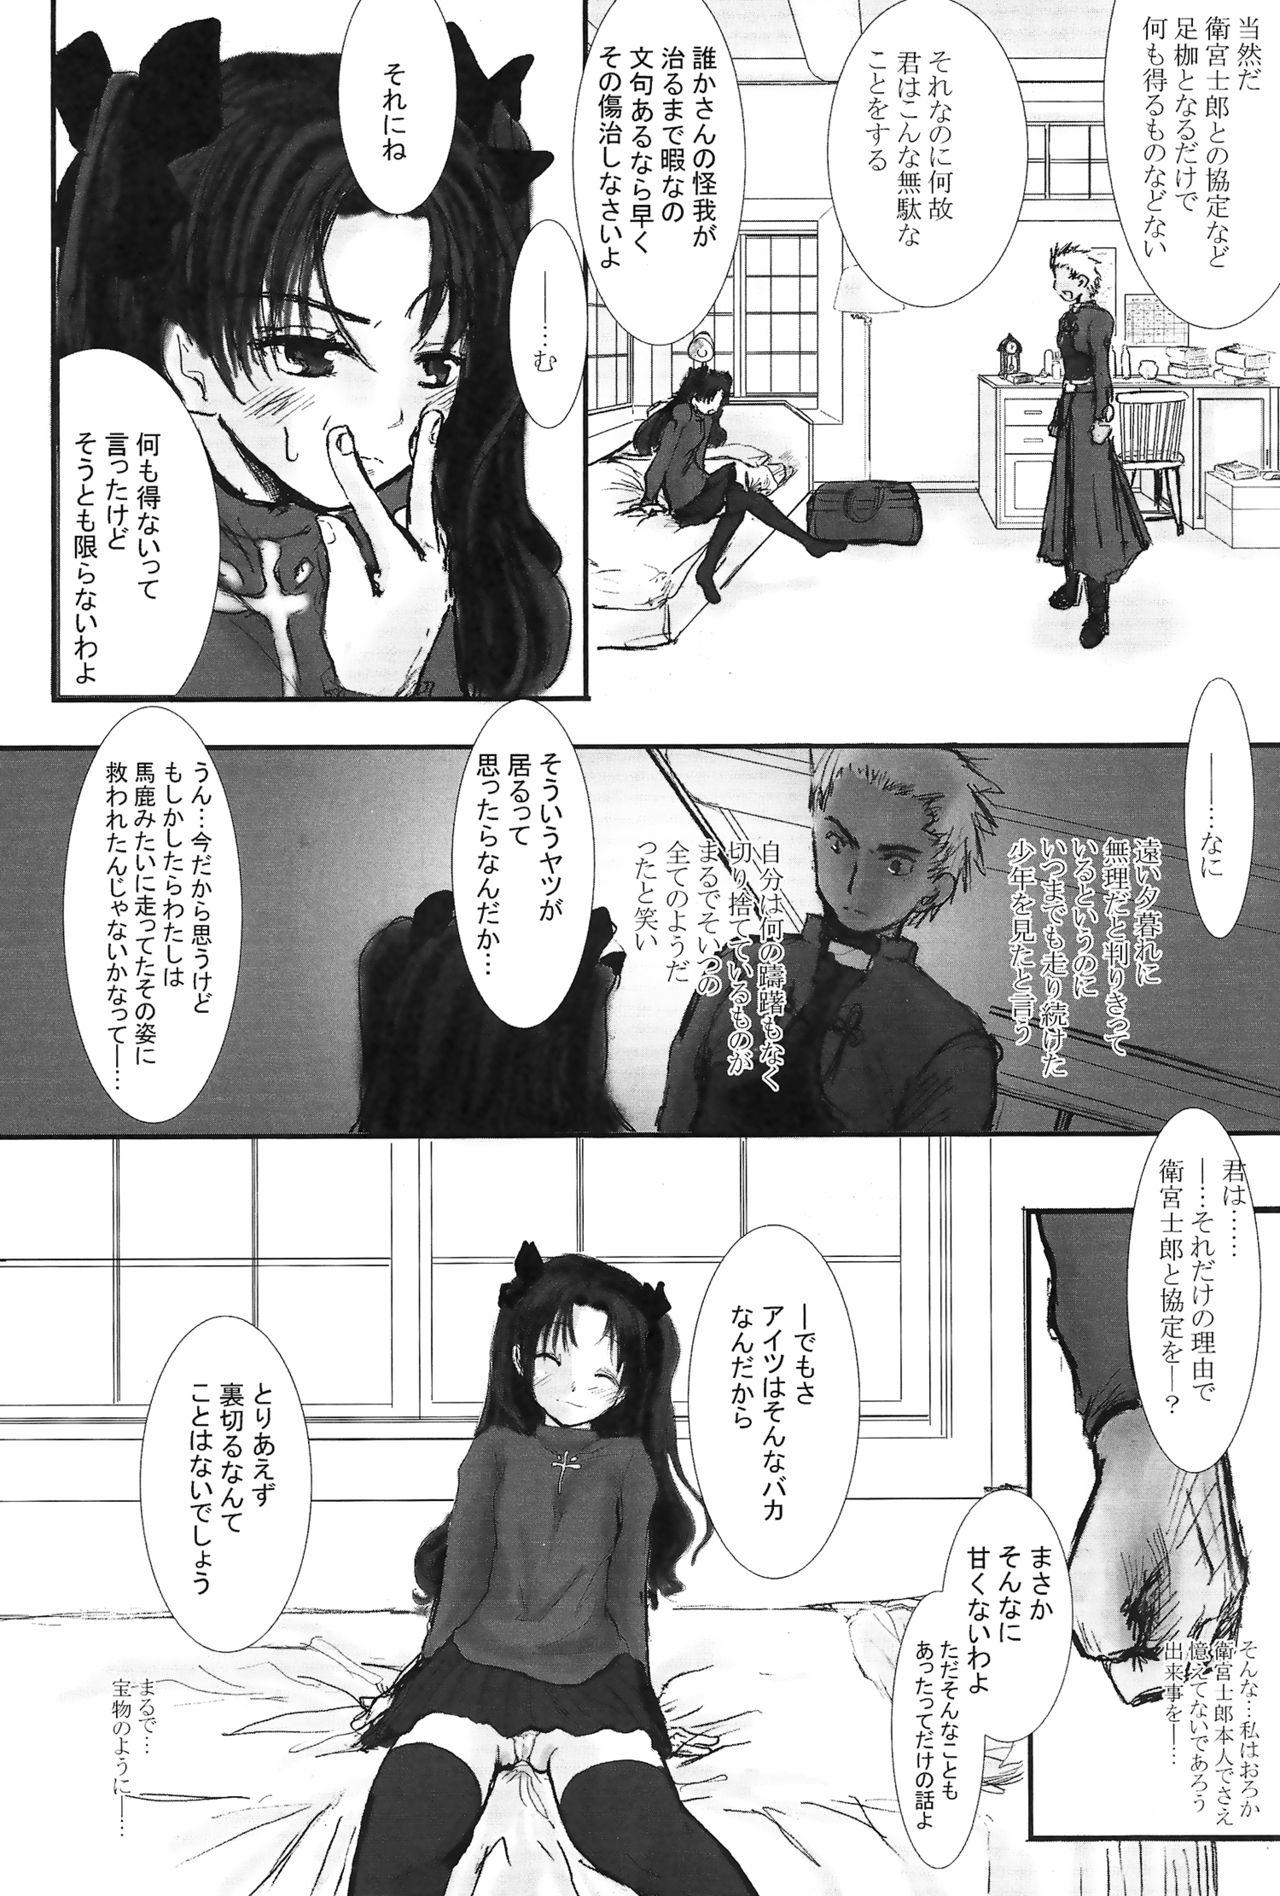 Wanking Another/Answer - Fate stay night Classy - Page 9